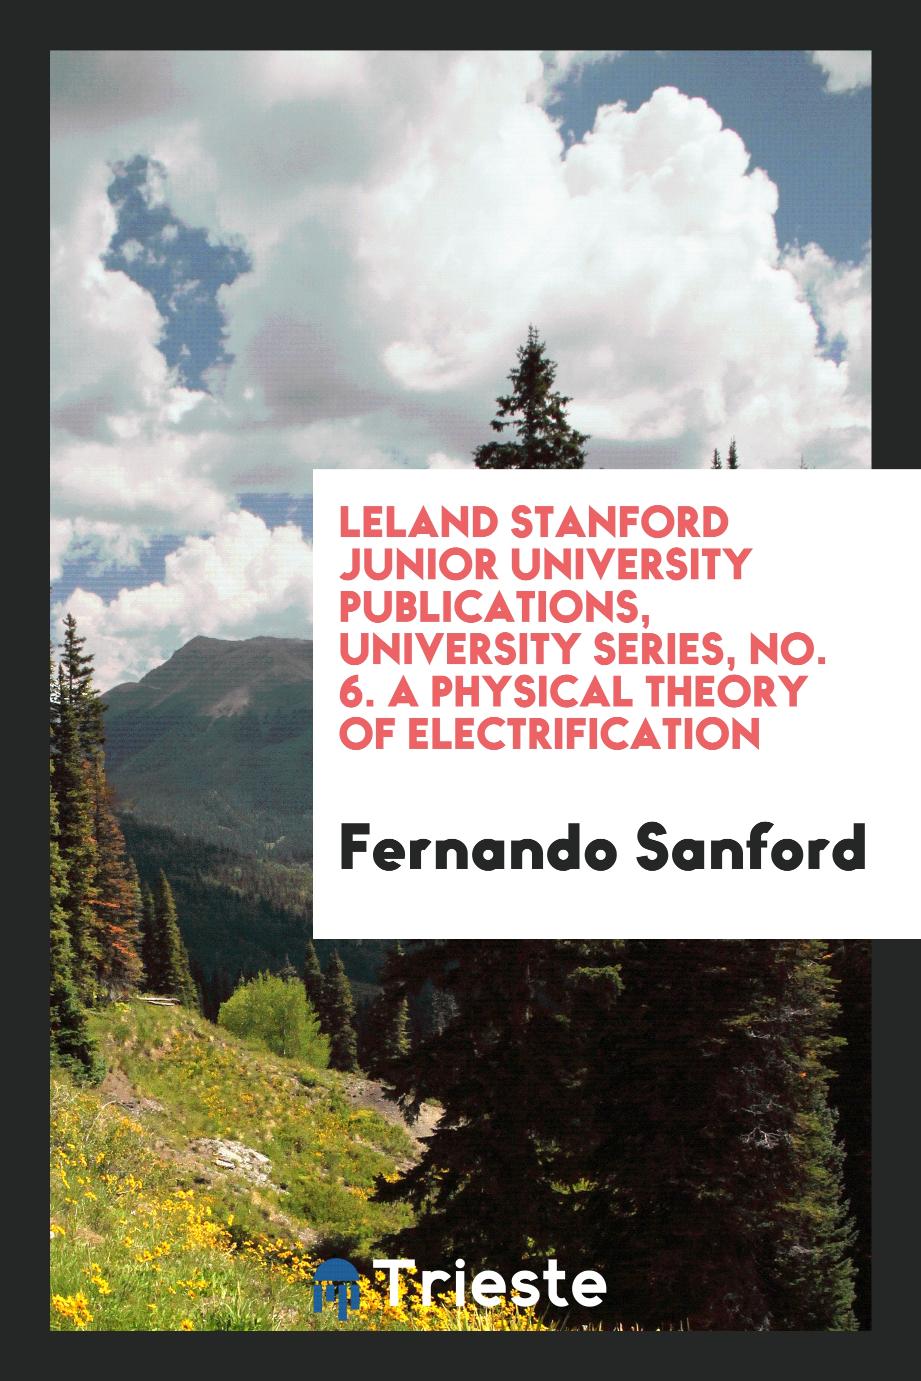 Leland Stanford Junior University publications, University series, No. 6. A Physical Theory of Electrification